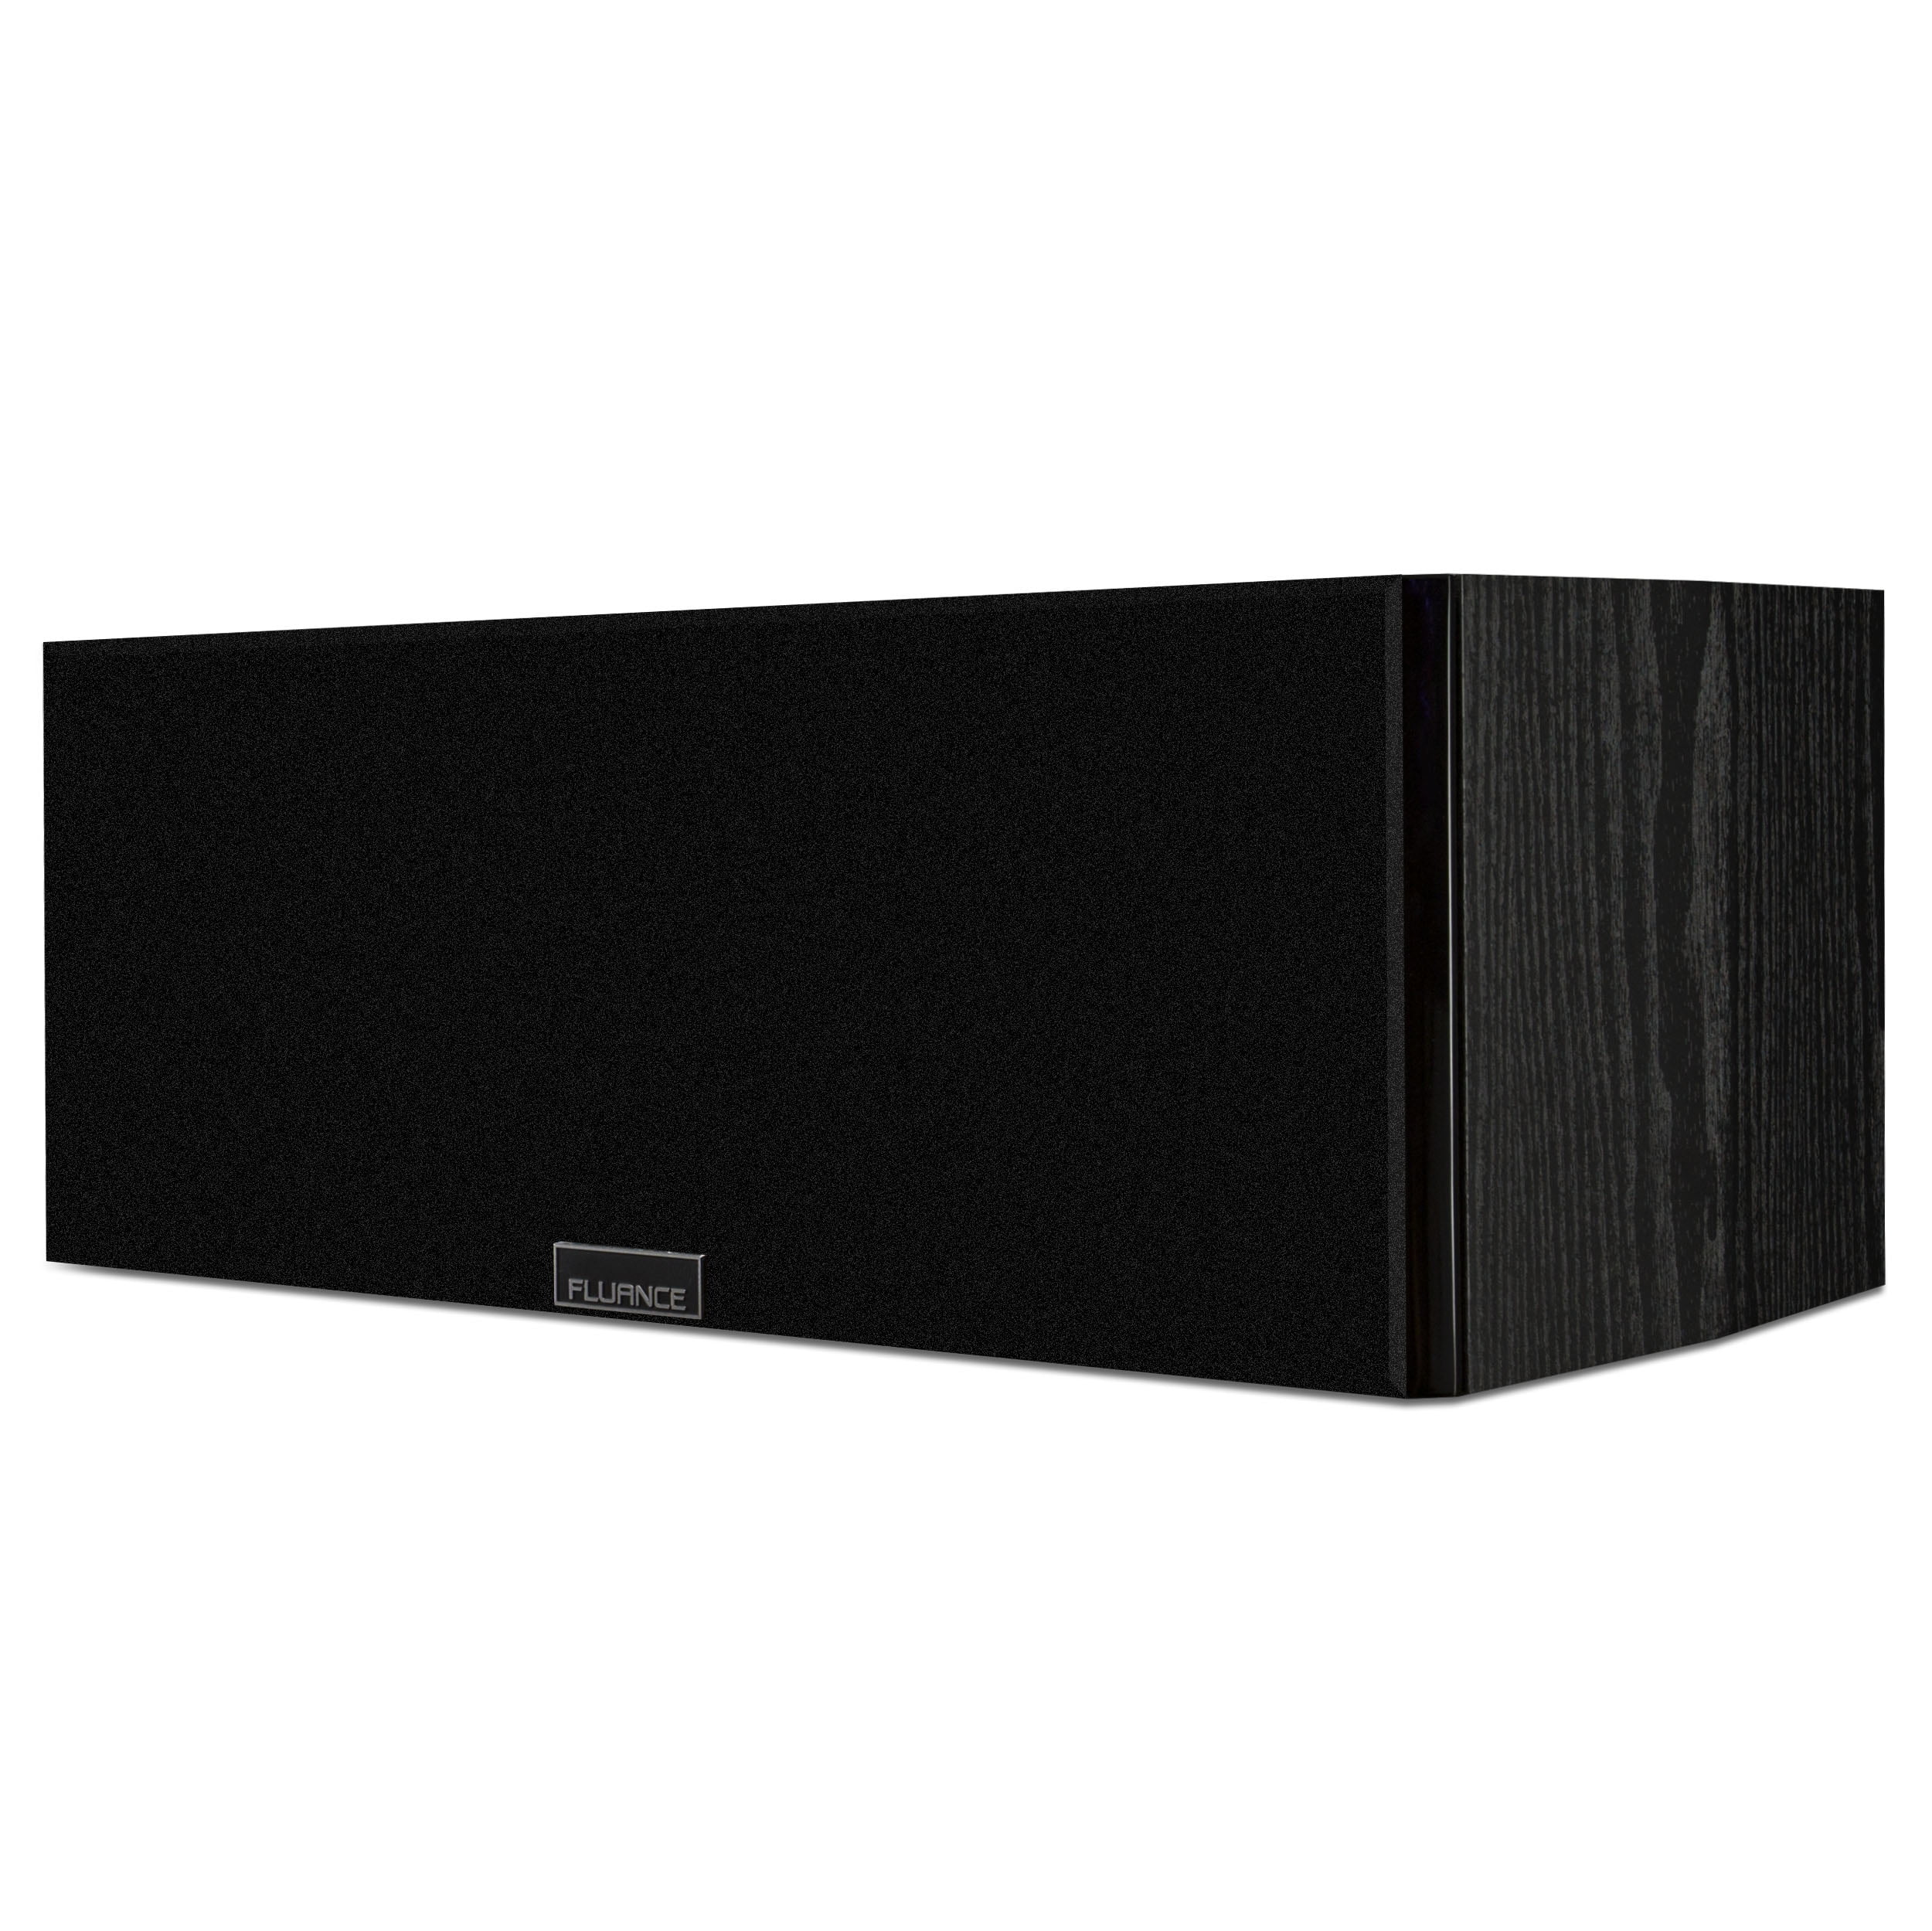 HF51BC Center Black Ash and DB12 Subwoofer Fluance Signature Series Compact Surround Sound Home Theater 5.1 Channel Speaker System Including Two-Way Bookshelf Rear Surround Speakers